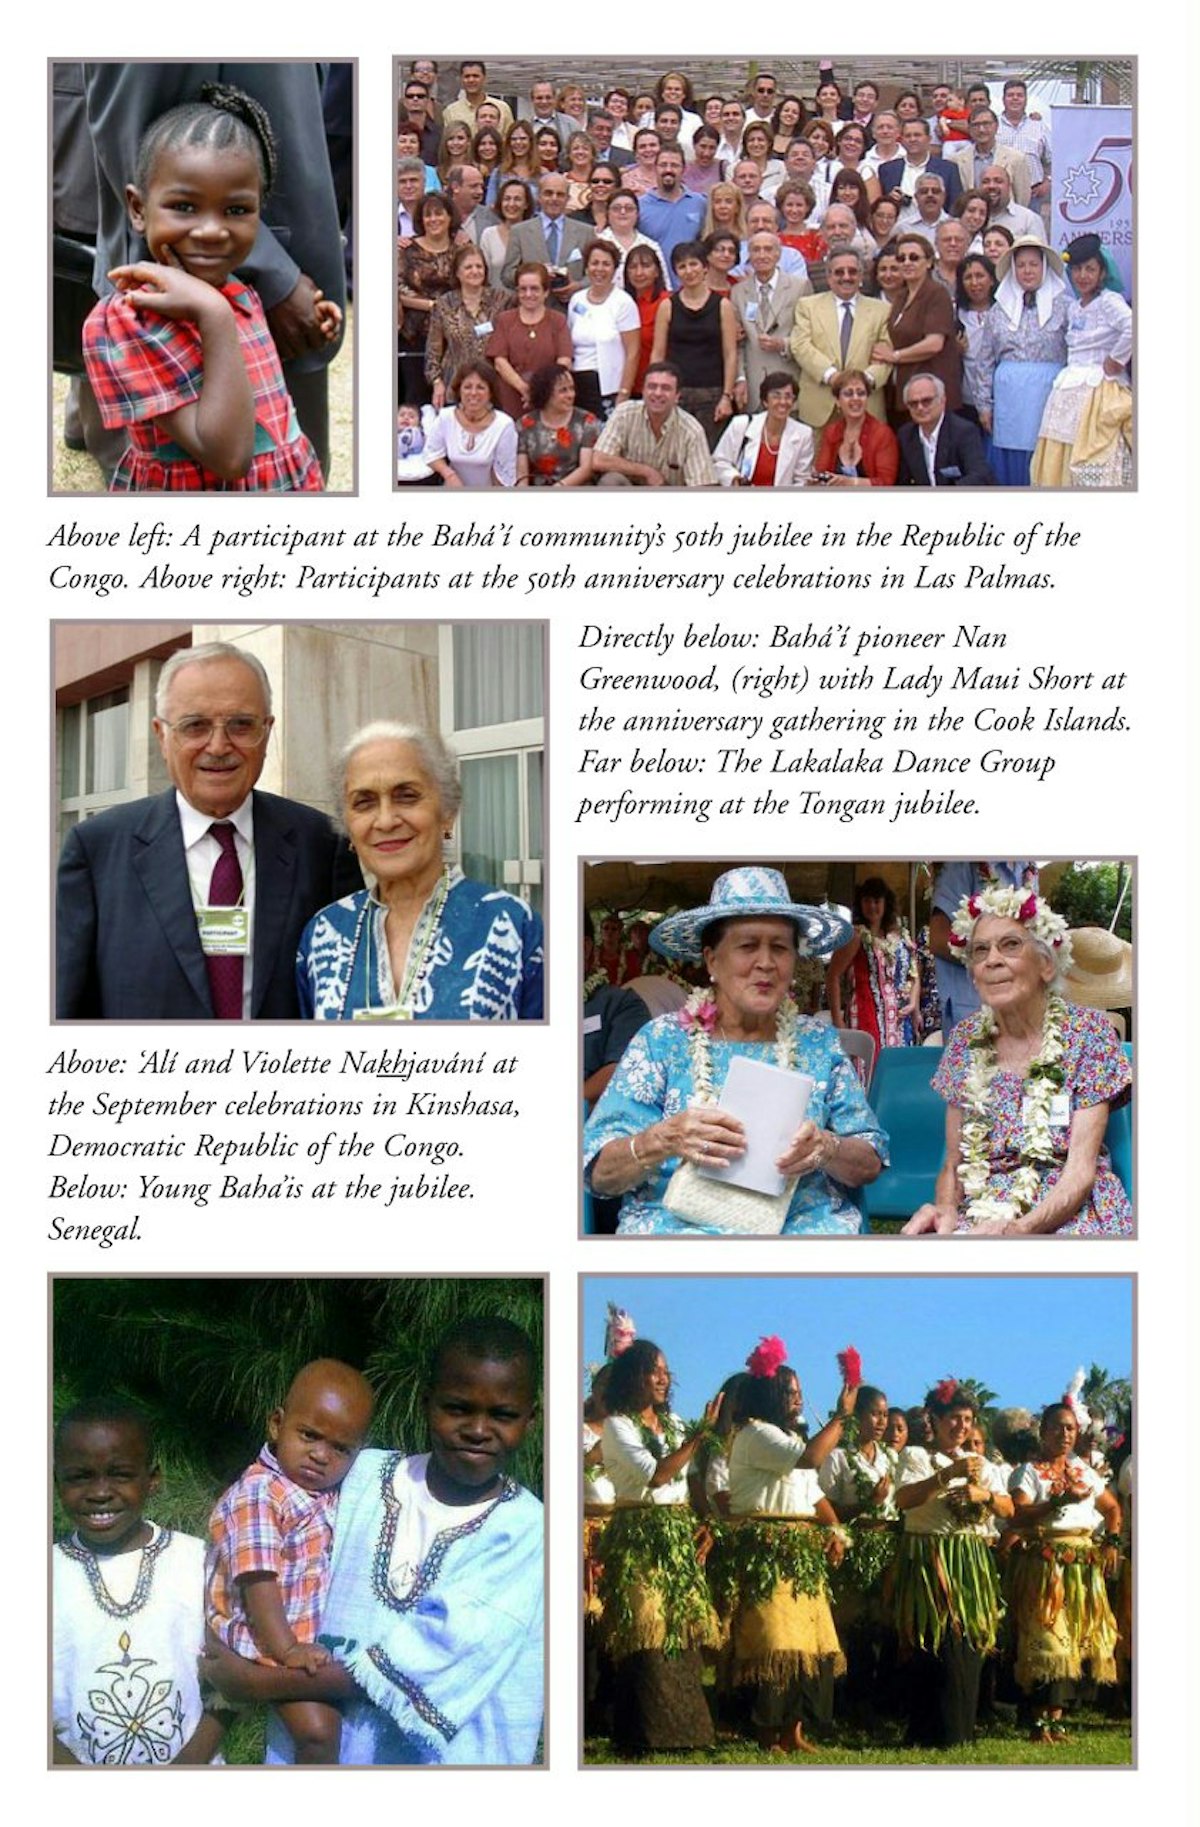 A page of photographs in "The Baha'i World 2003-2004."